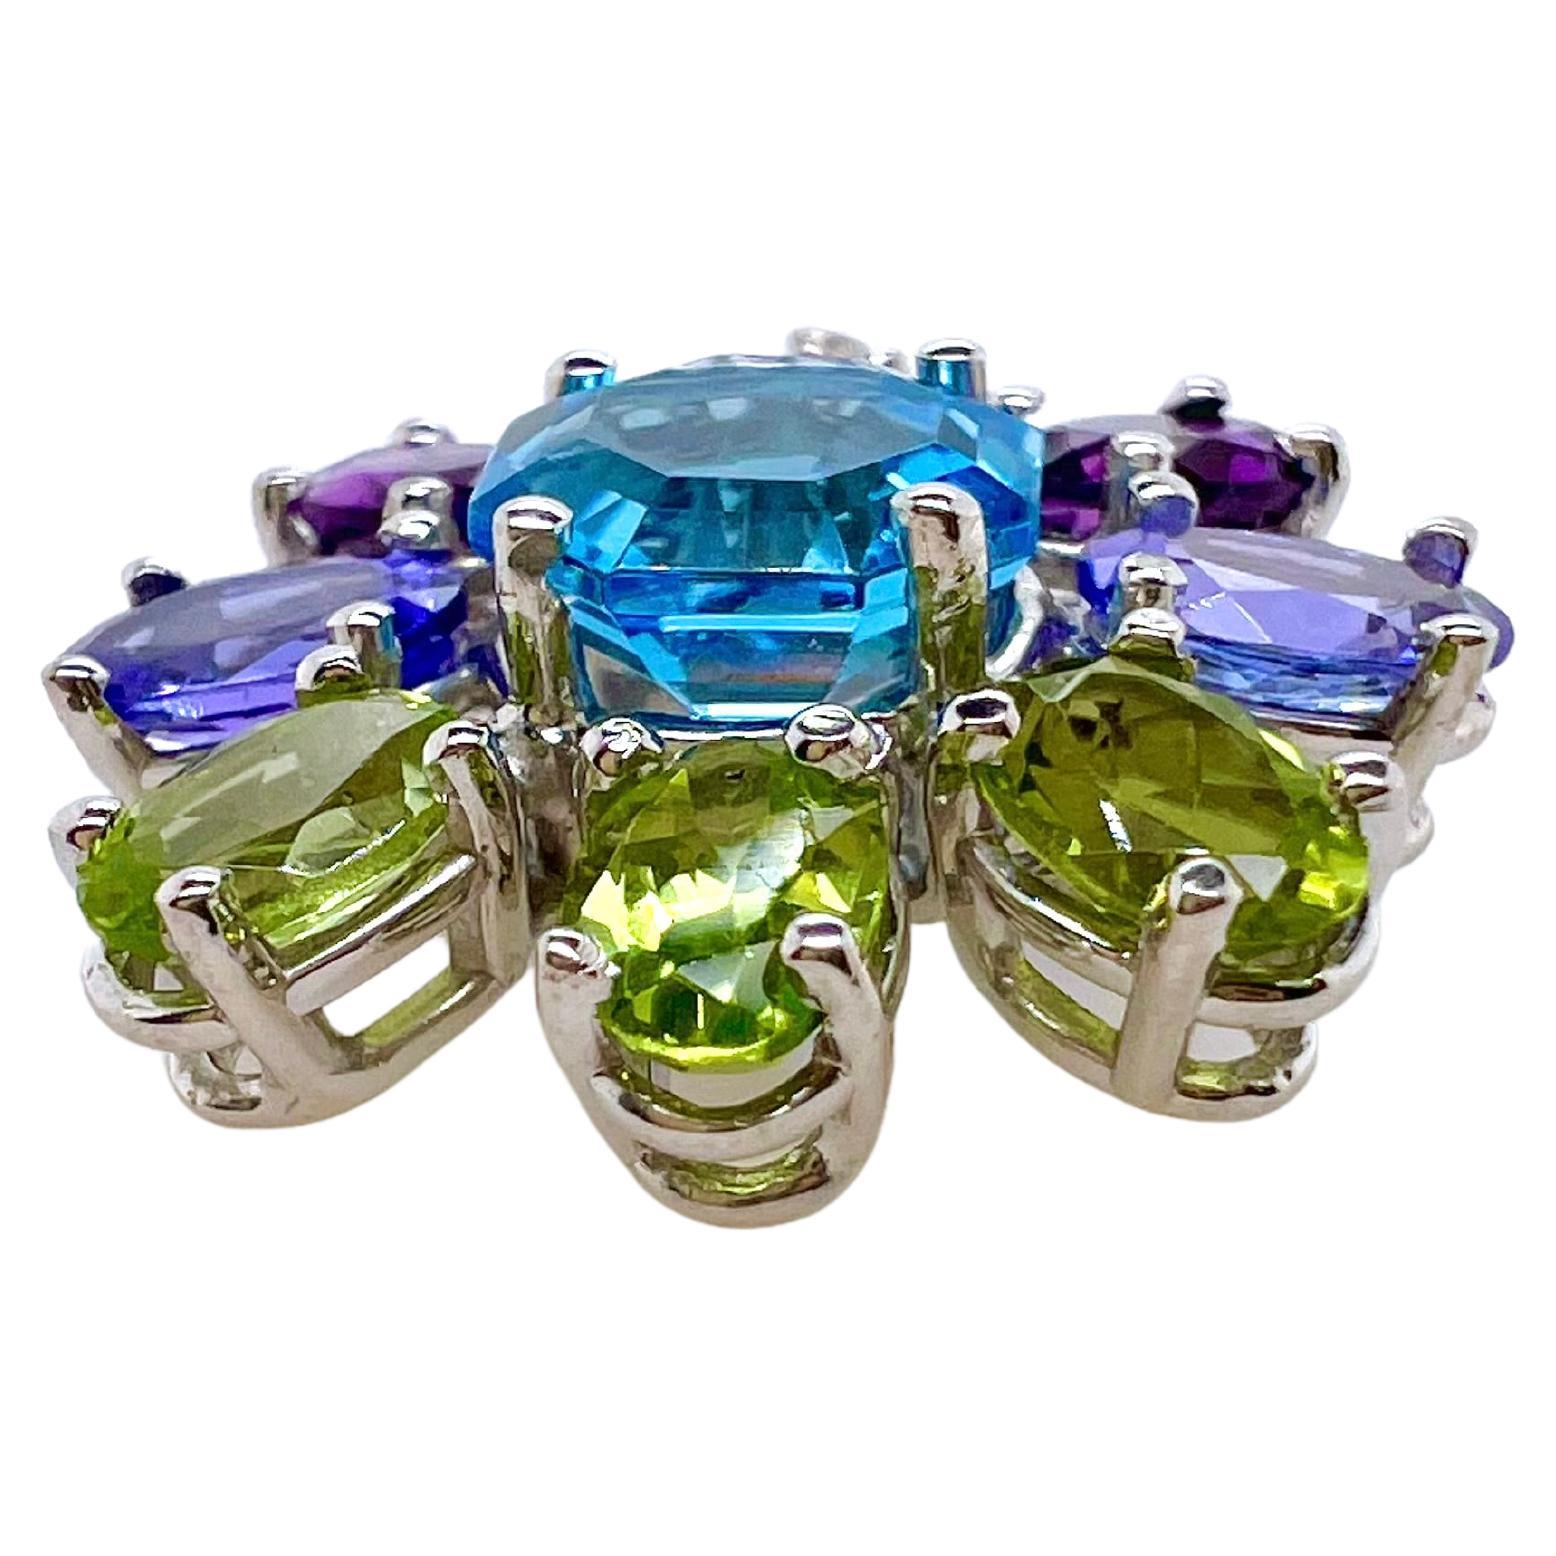 This beautiful, semi-precious pendant is arranged in a whimsical, floral pattern.  The peridots, amethysts, tanzanites, and blue topazes make up he colorful arrangement.  A perfect way to finish any outfit for a lighter, more playful